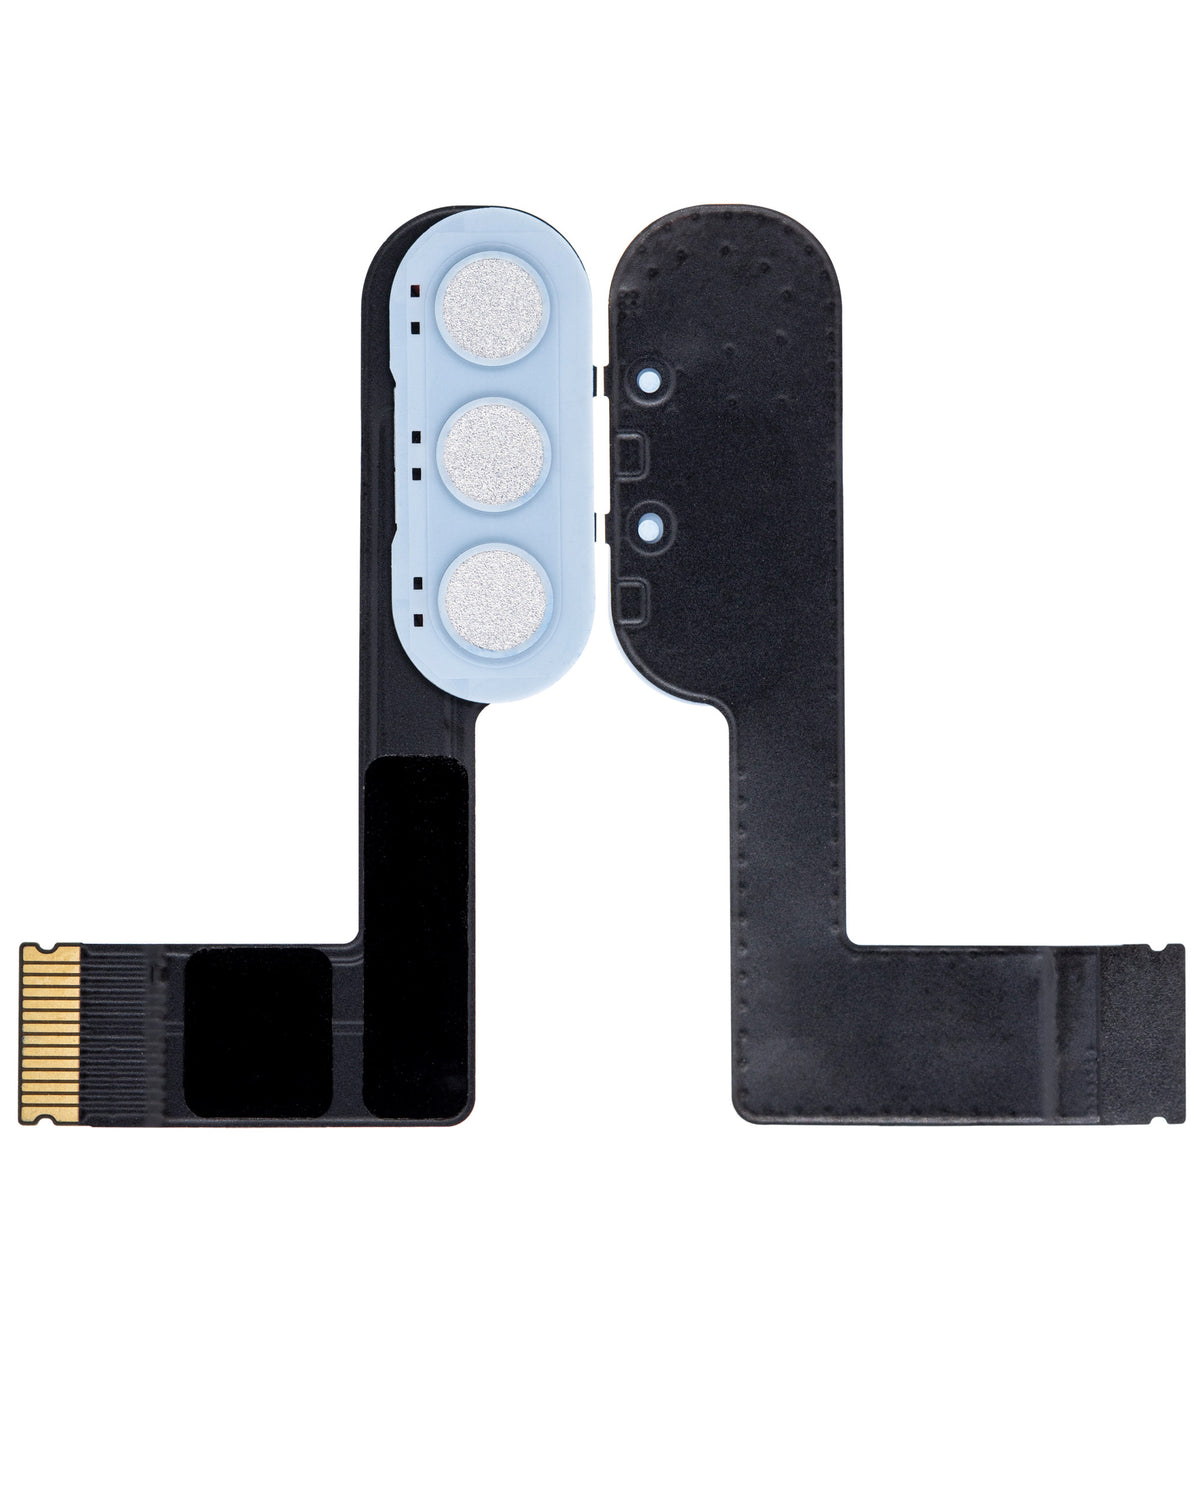 KEYBOARD FLEX CABLE COMPATIBLE FOR IPAD AIR 4 - SKY BLUE